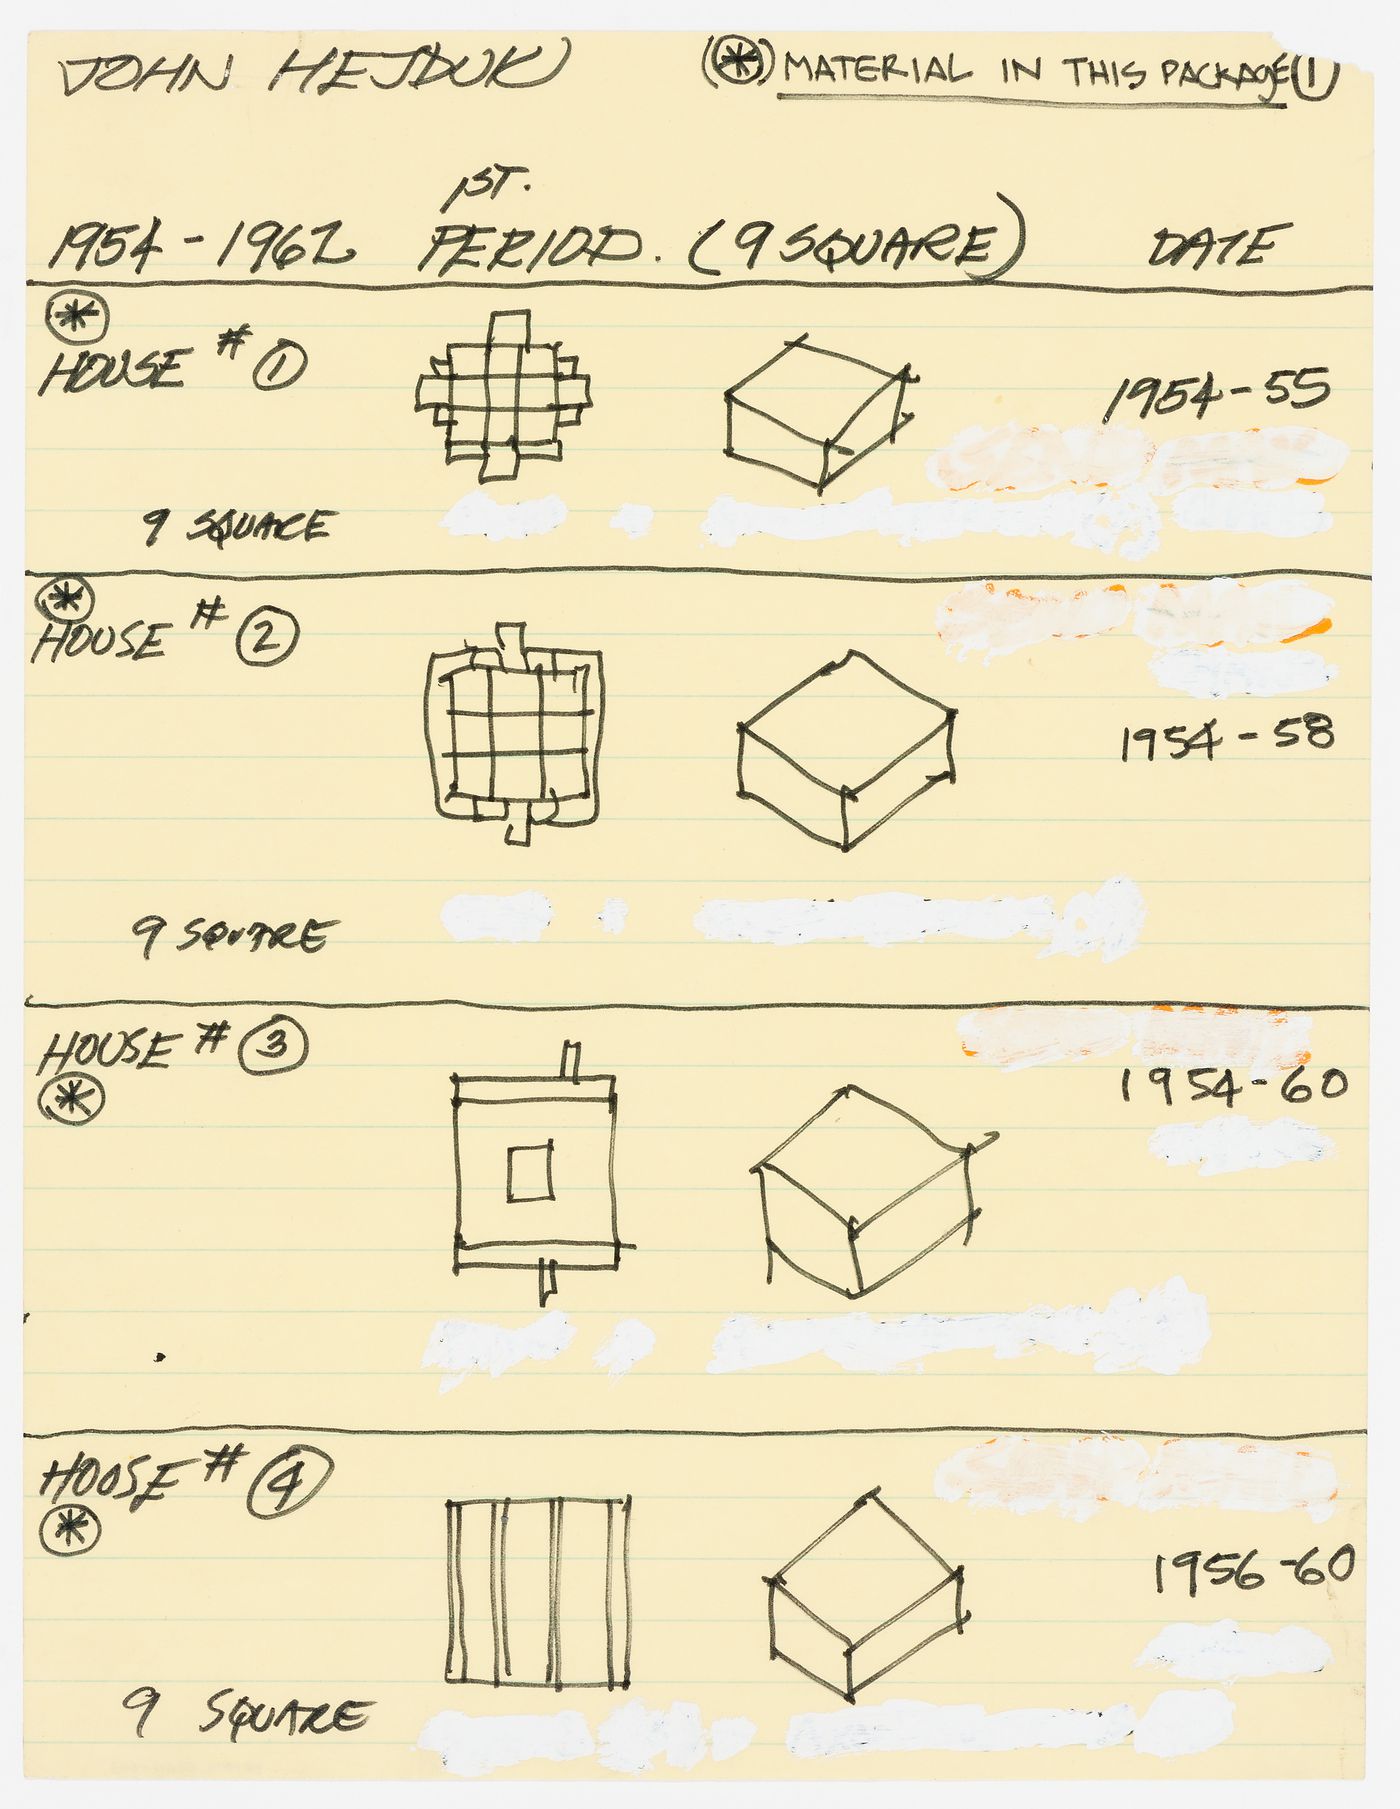 List of projects by John Hejduk. Sheet 1: 1954-1962 (1st period): House #1, House #2, House #3 and House #4